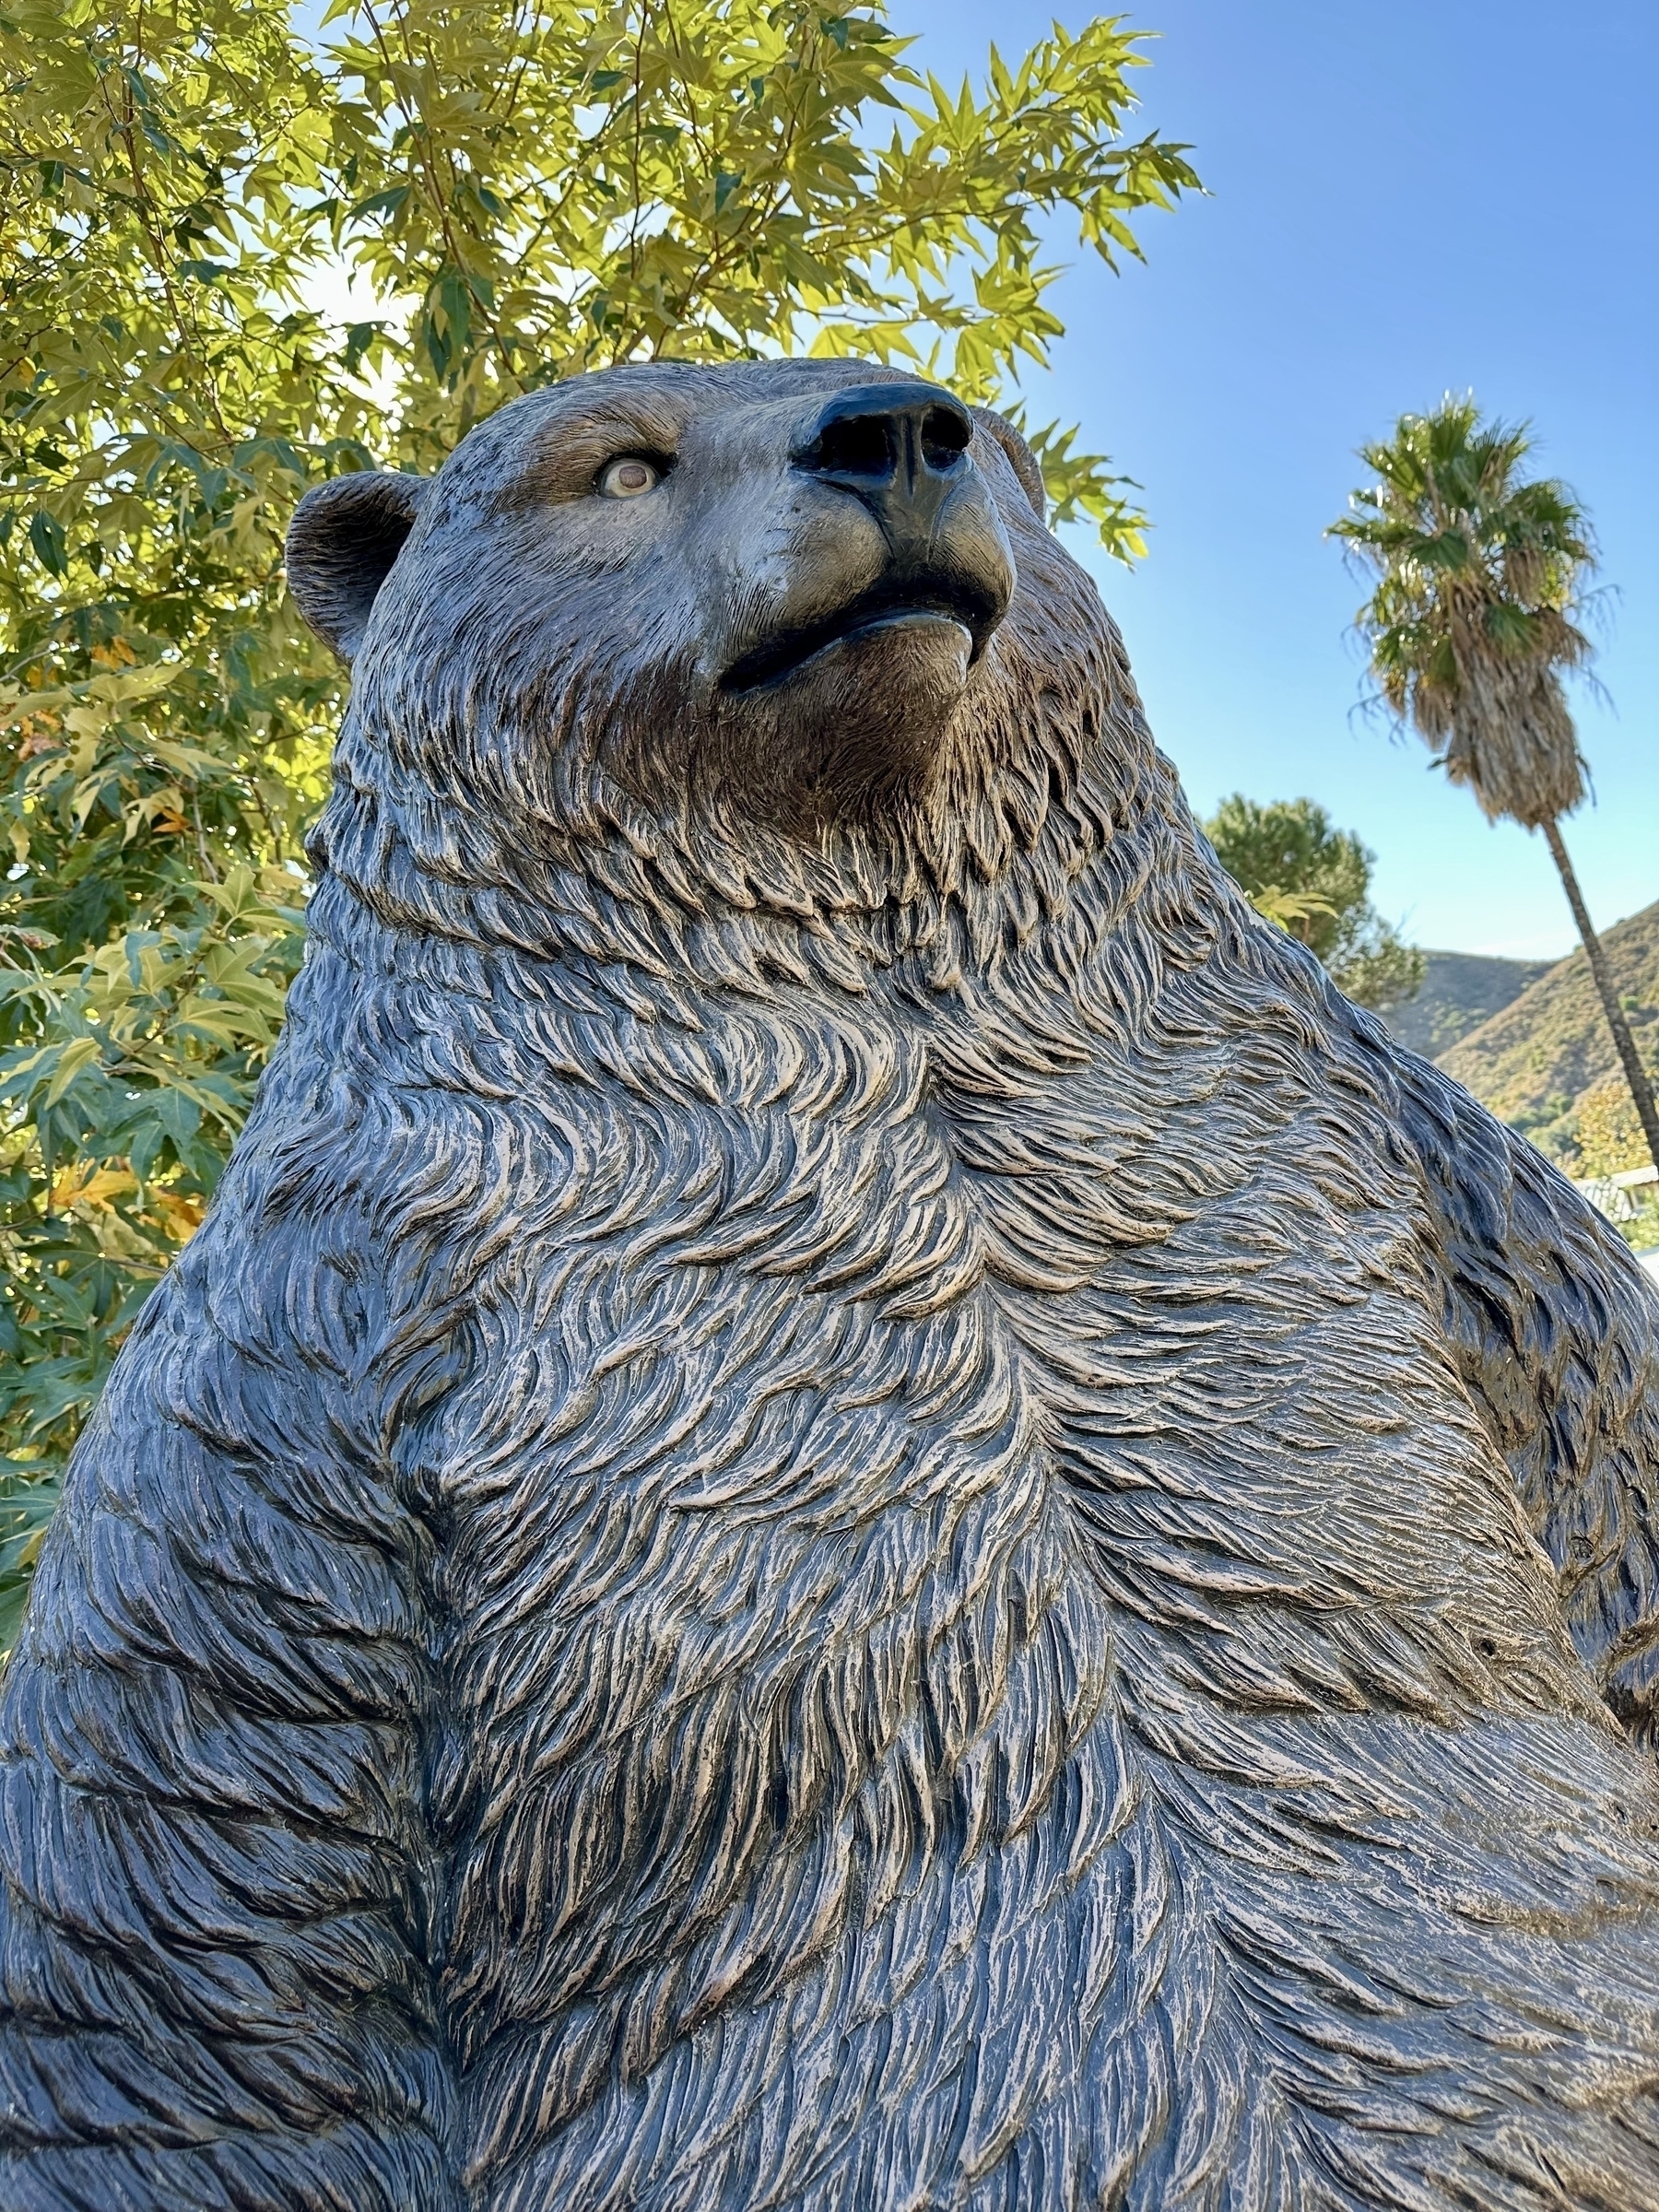 Close up of a carved bear likeness.